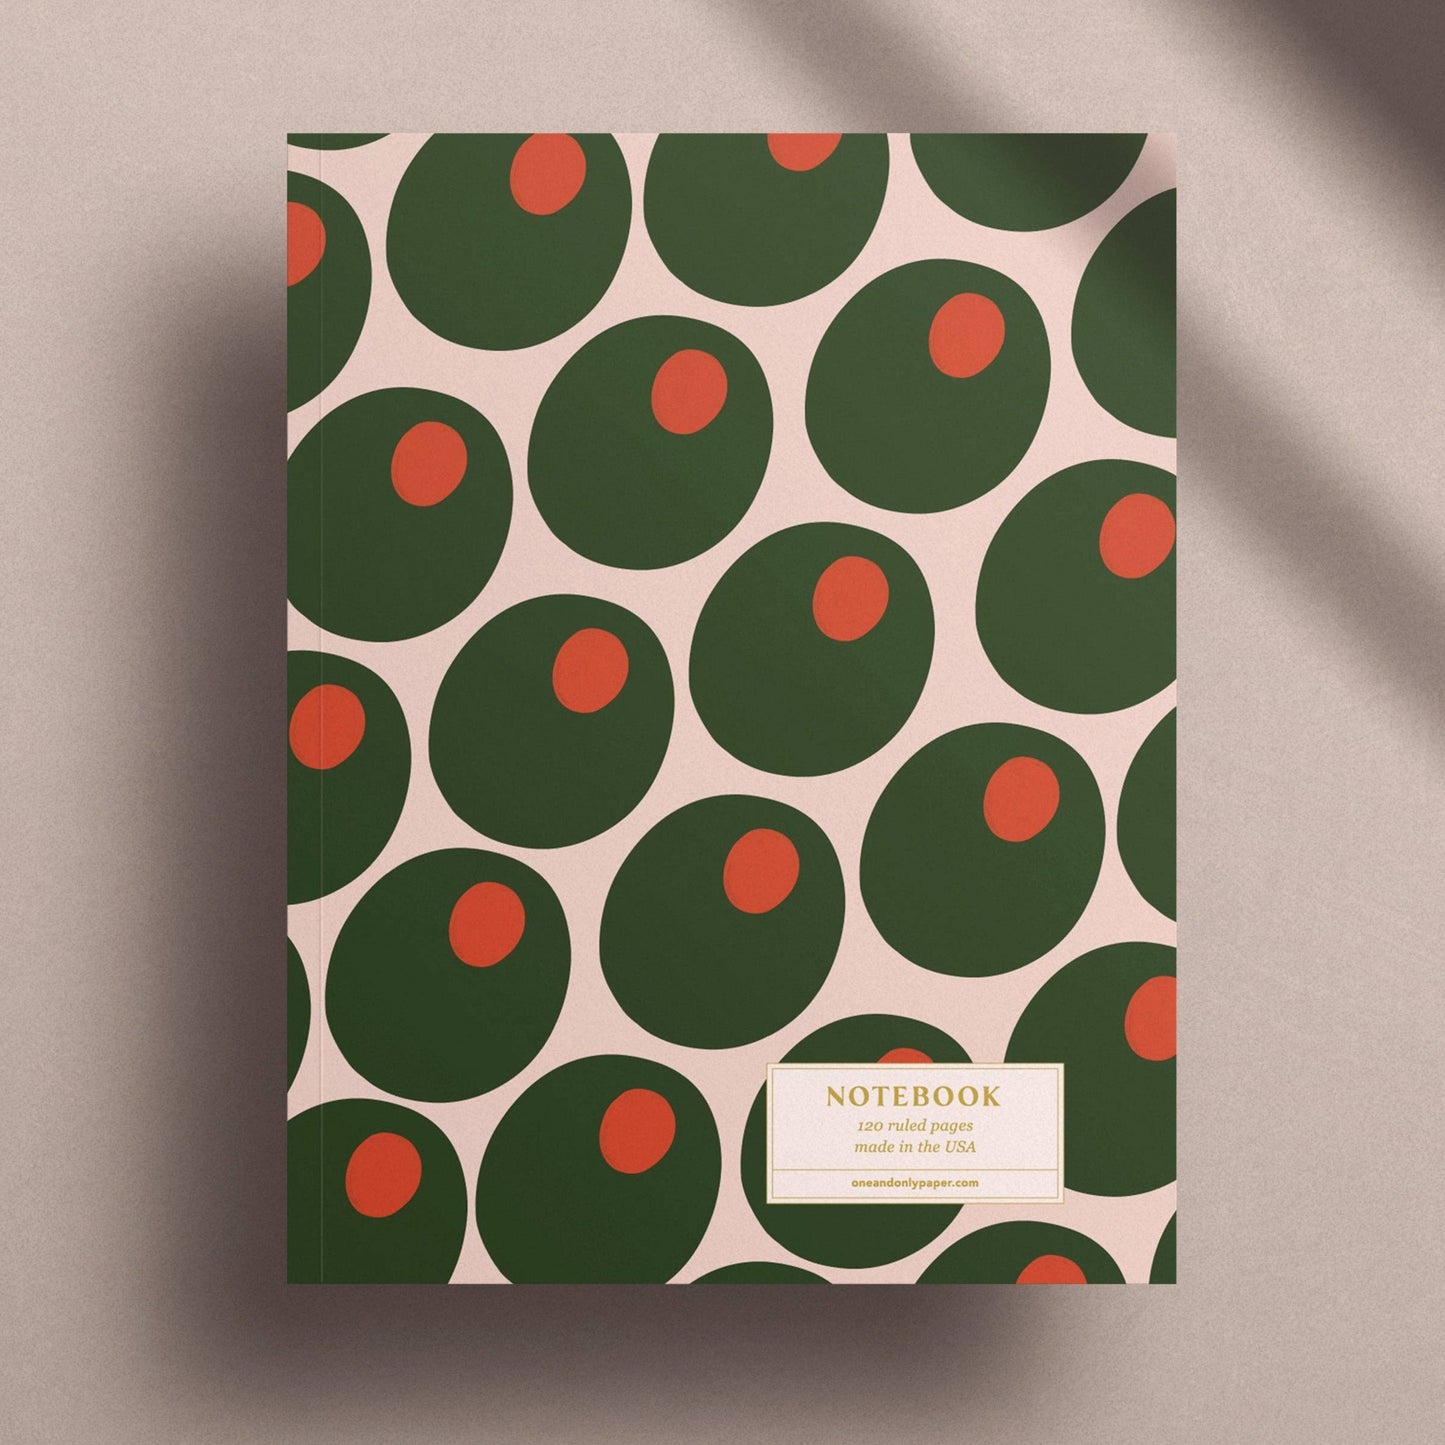 Notebook with pimento olives as the cover design